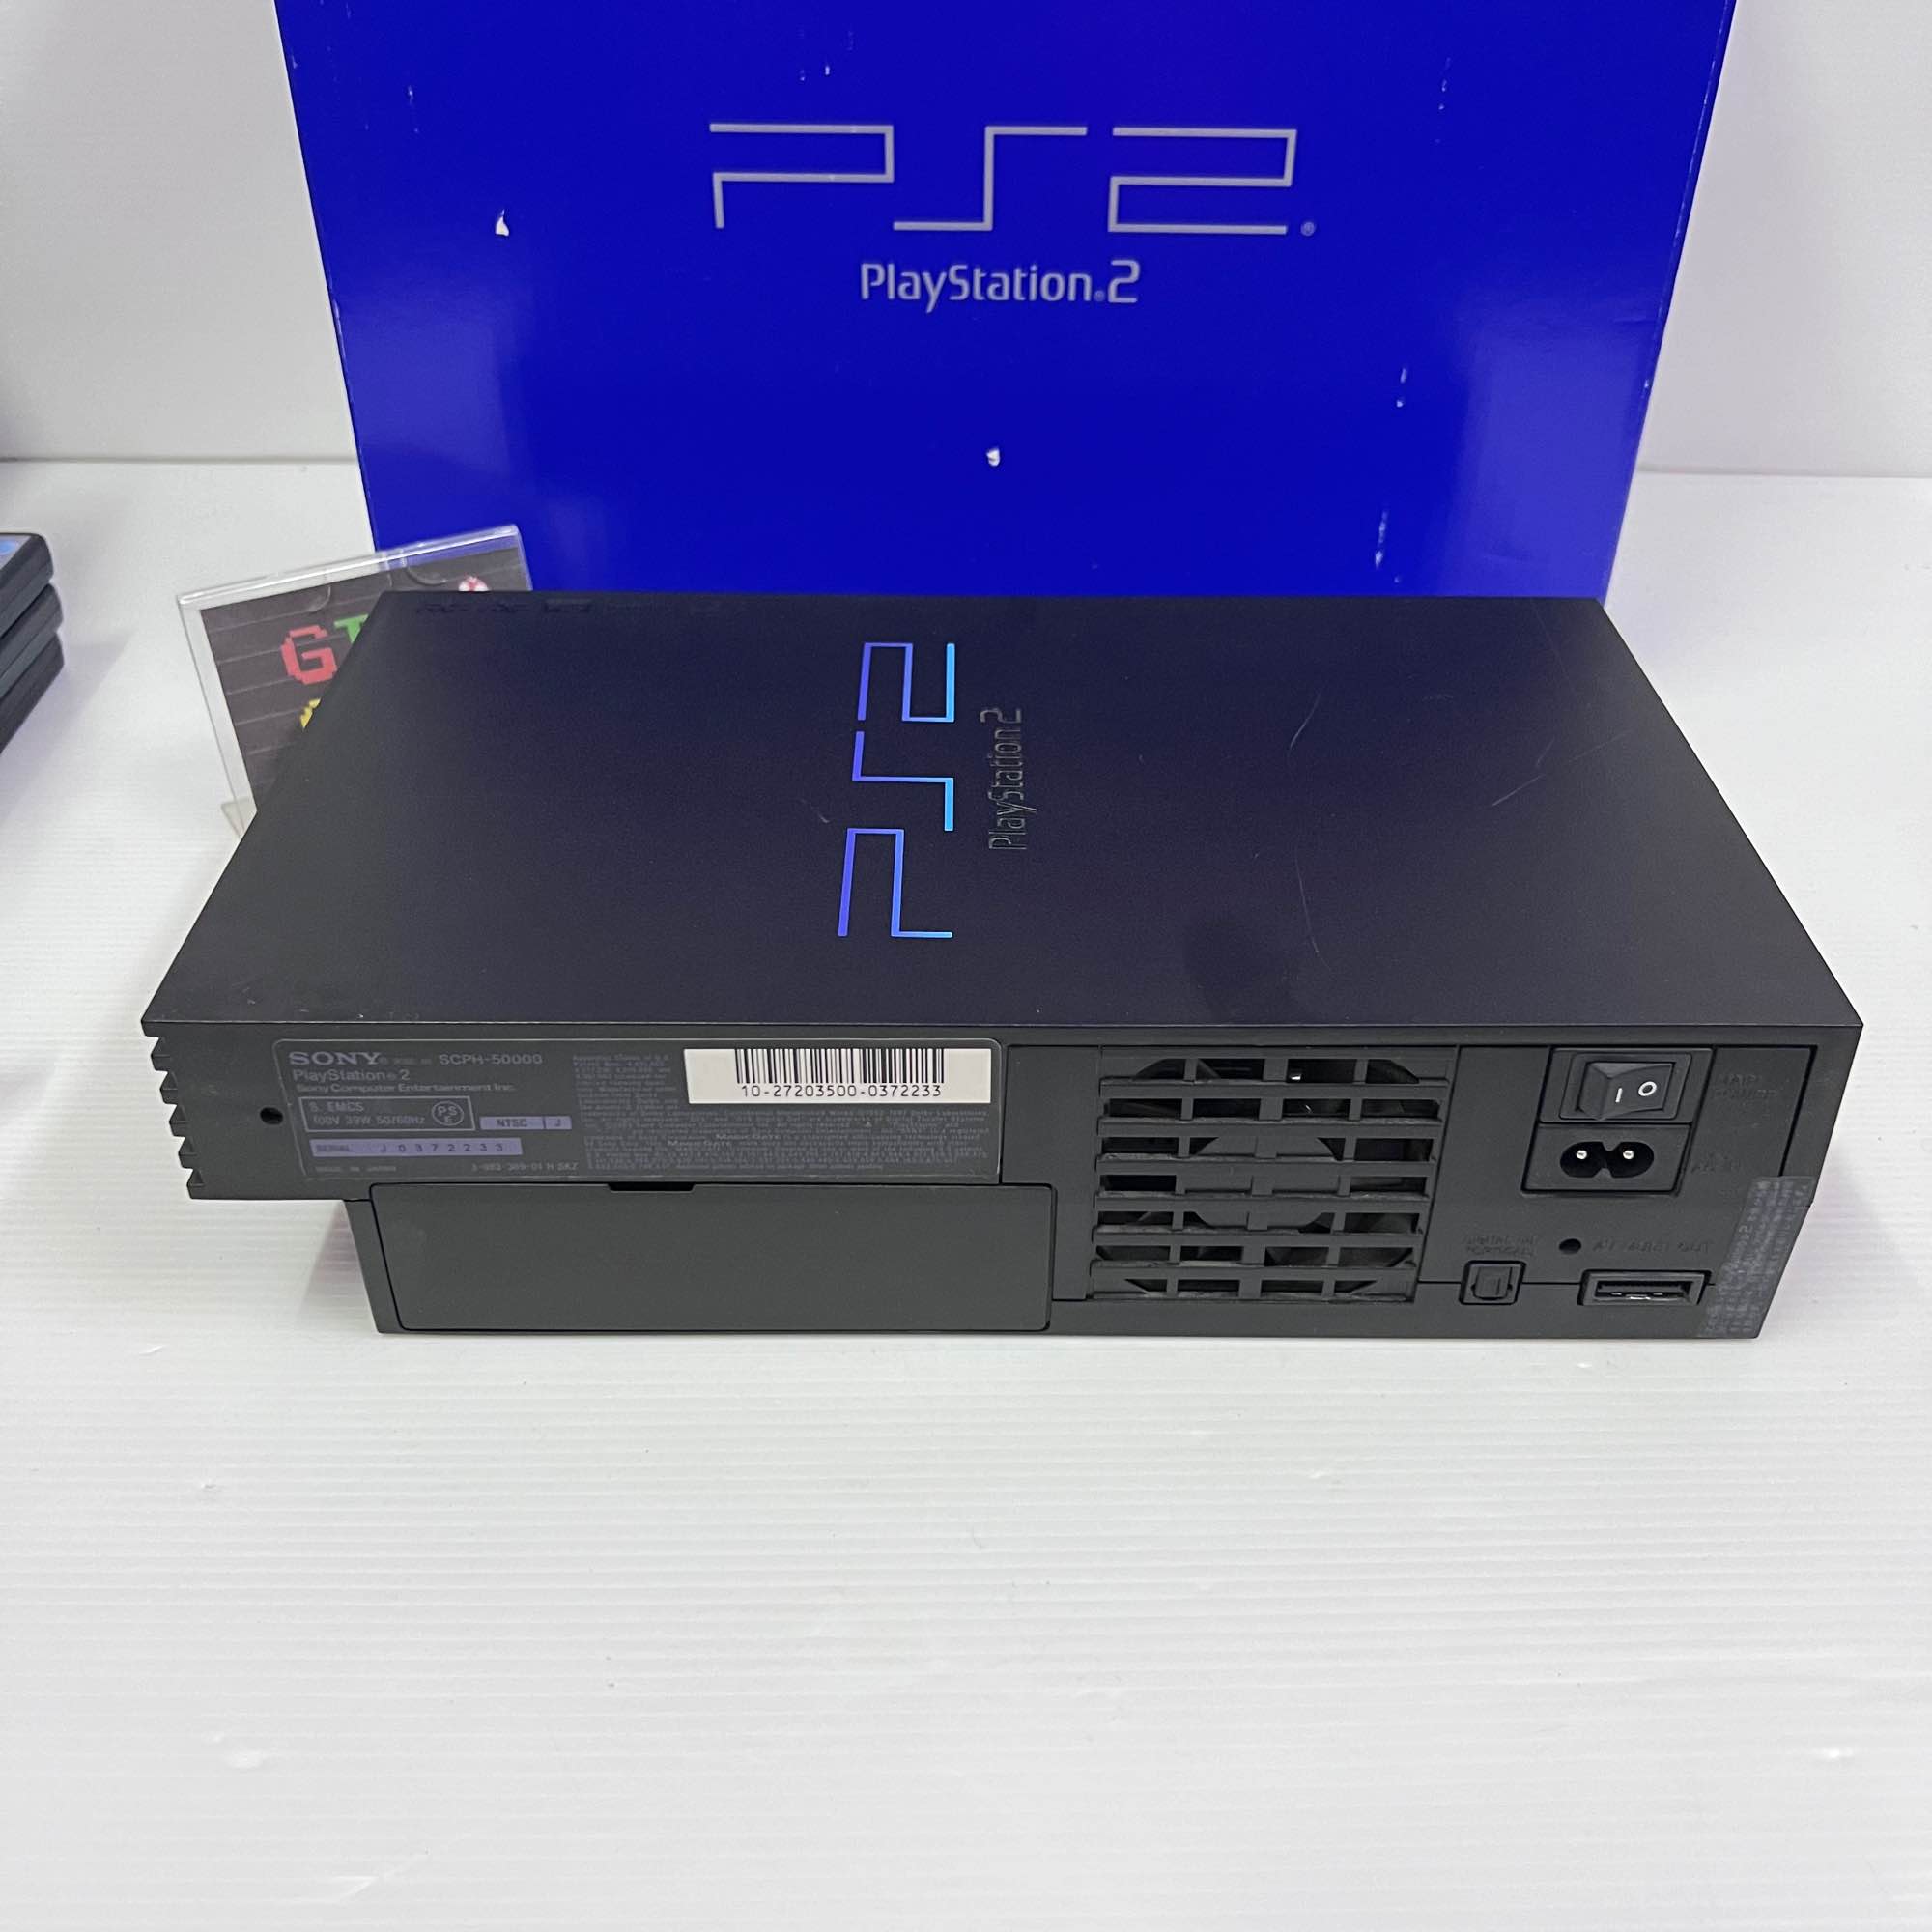 Sony Ps2 / Playstation 2 Boxed 95% SCPH-50000 🇯🇵 Original JP 110 